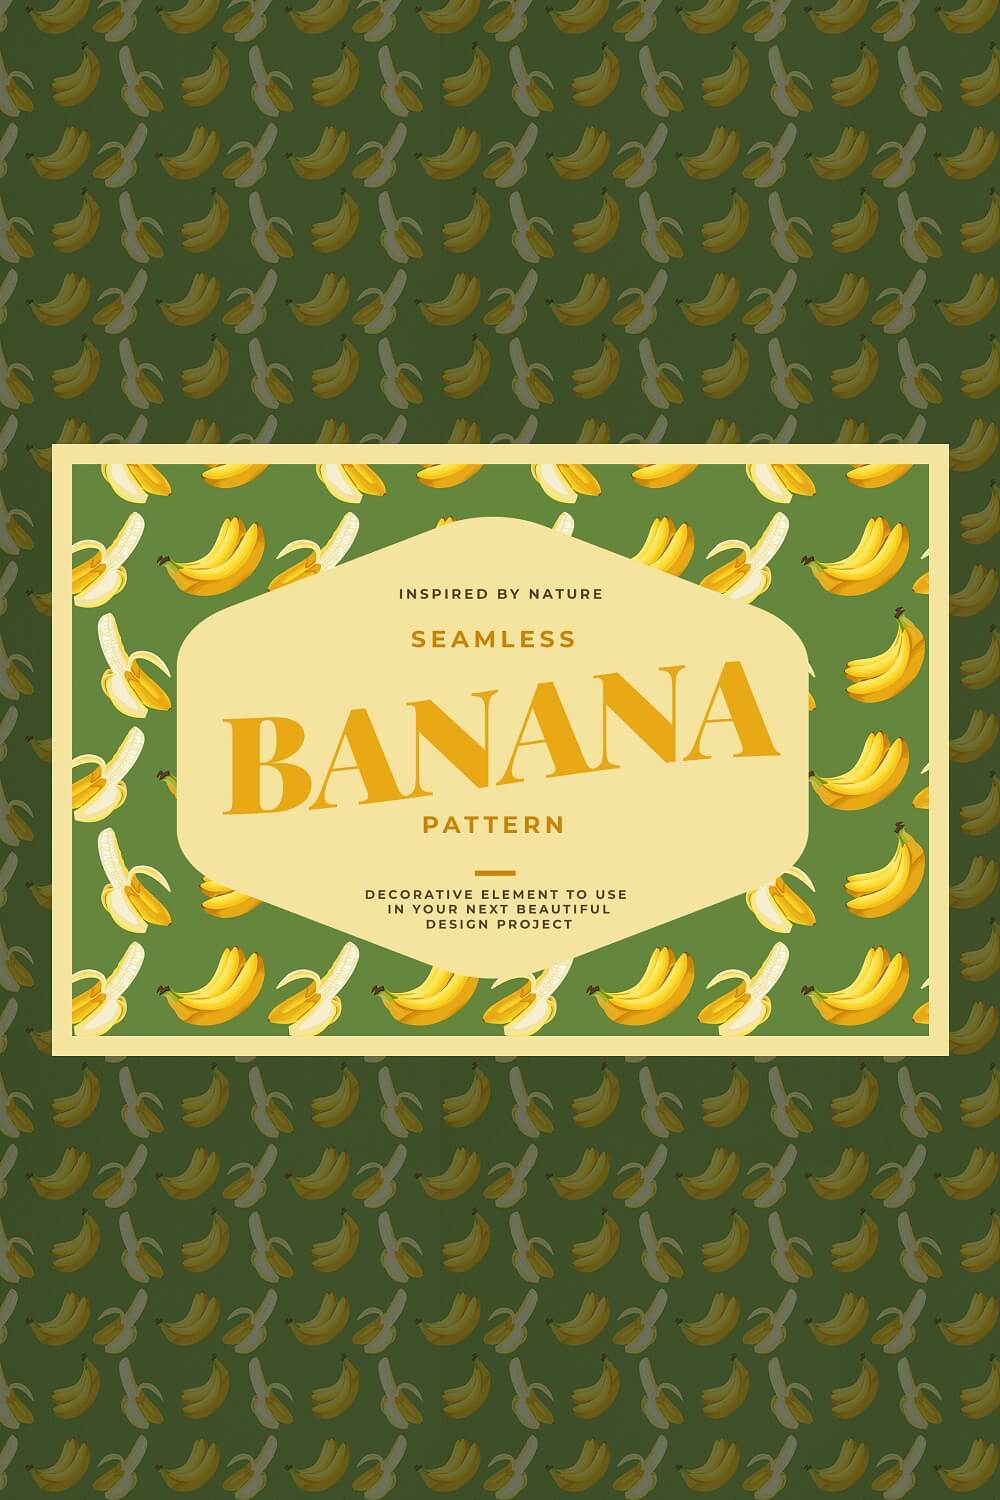 Seamless Banana Pattern inspired by nature.